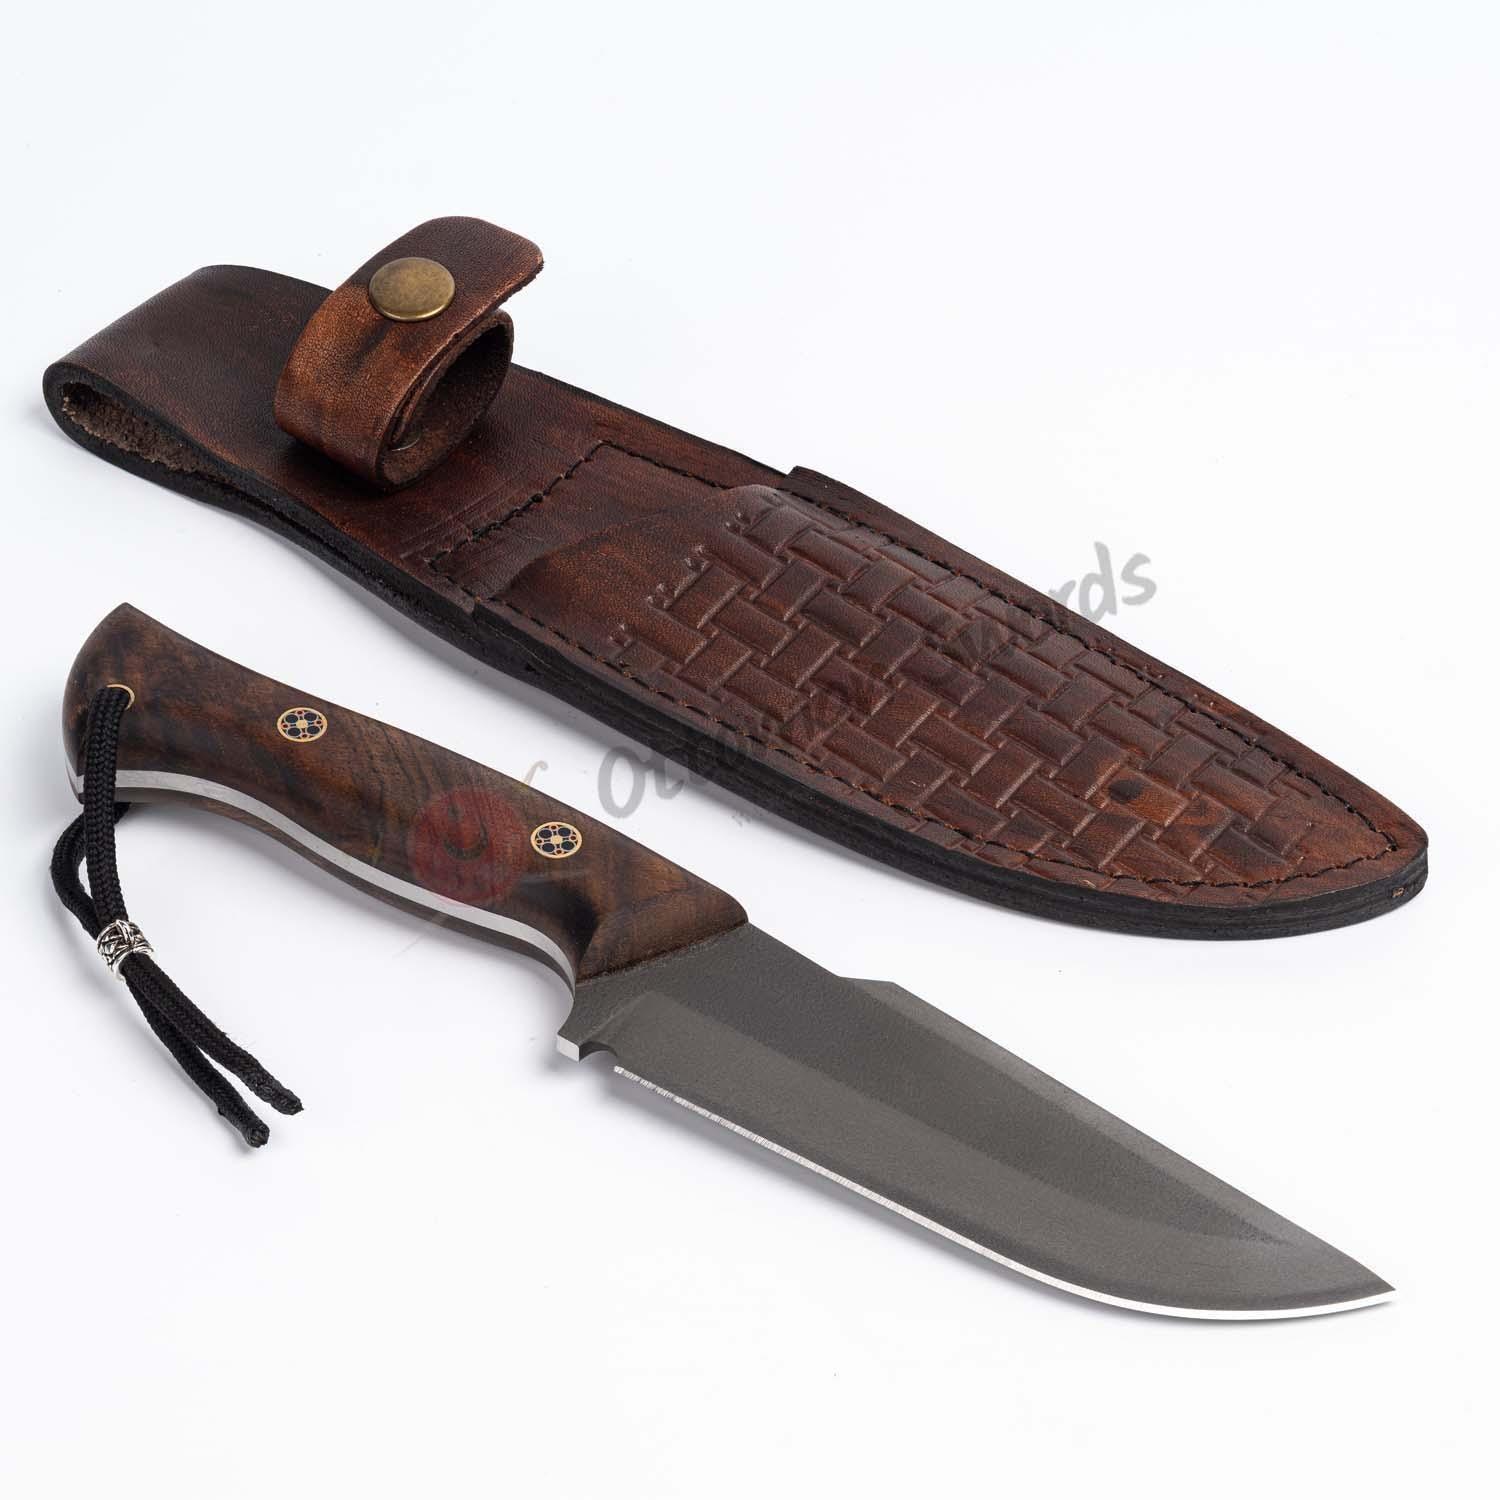 D2 Steel Full Tang Fixed Blade Survival Knife Walnut Handle (1)